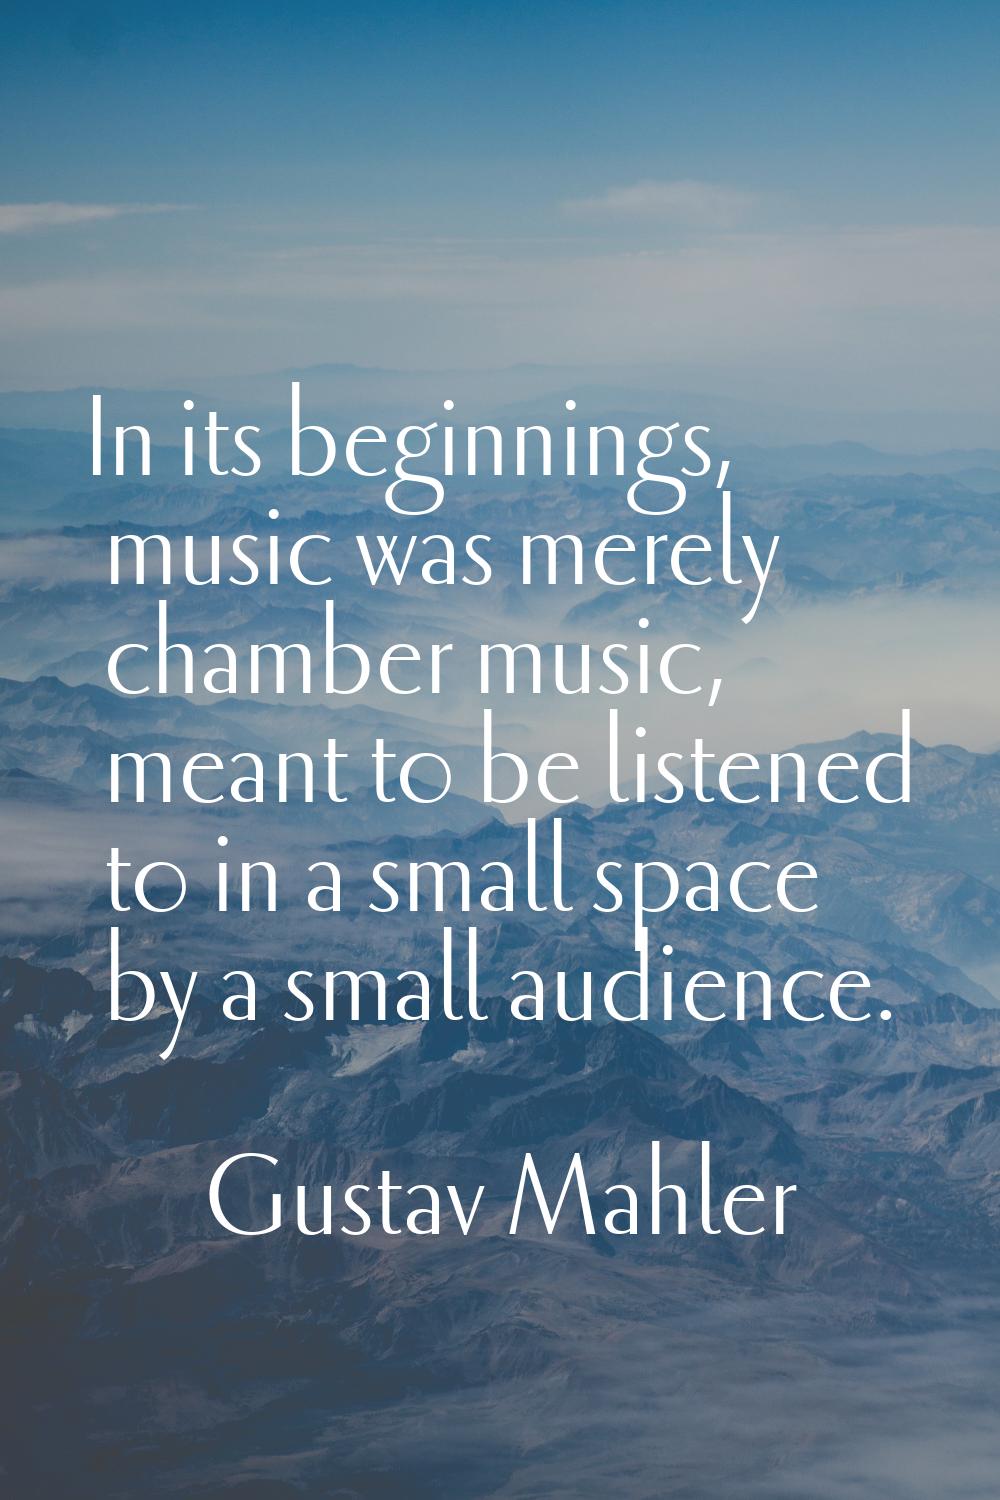 In its beginnings, music was merely chamber music, meant to be listened to in a small space by a sm